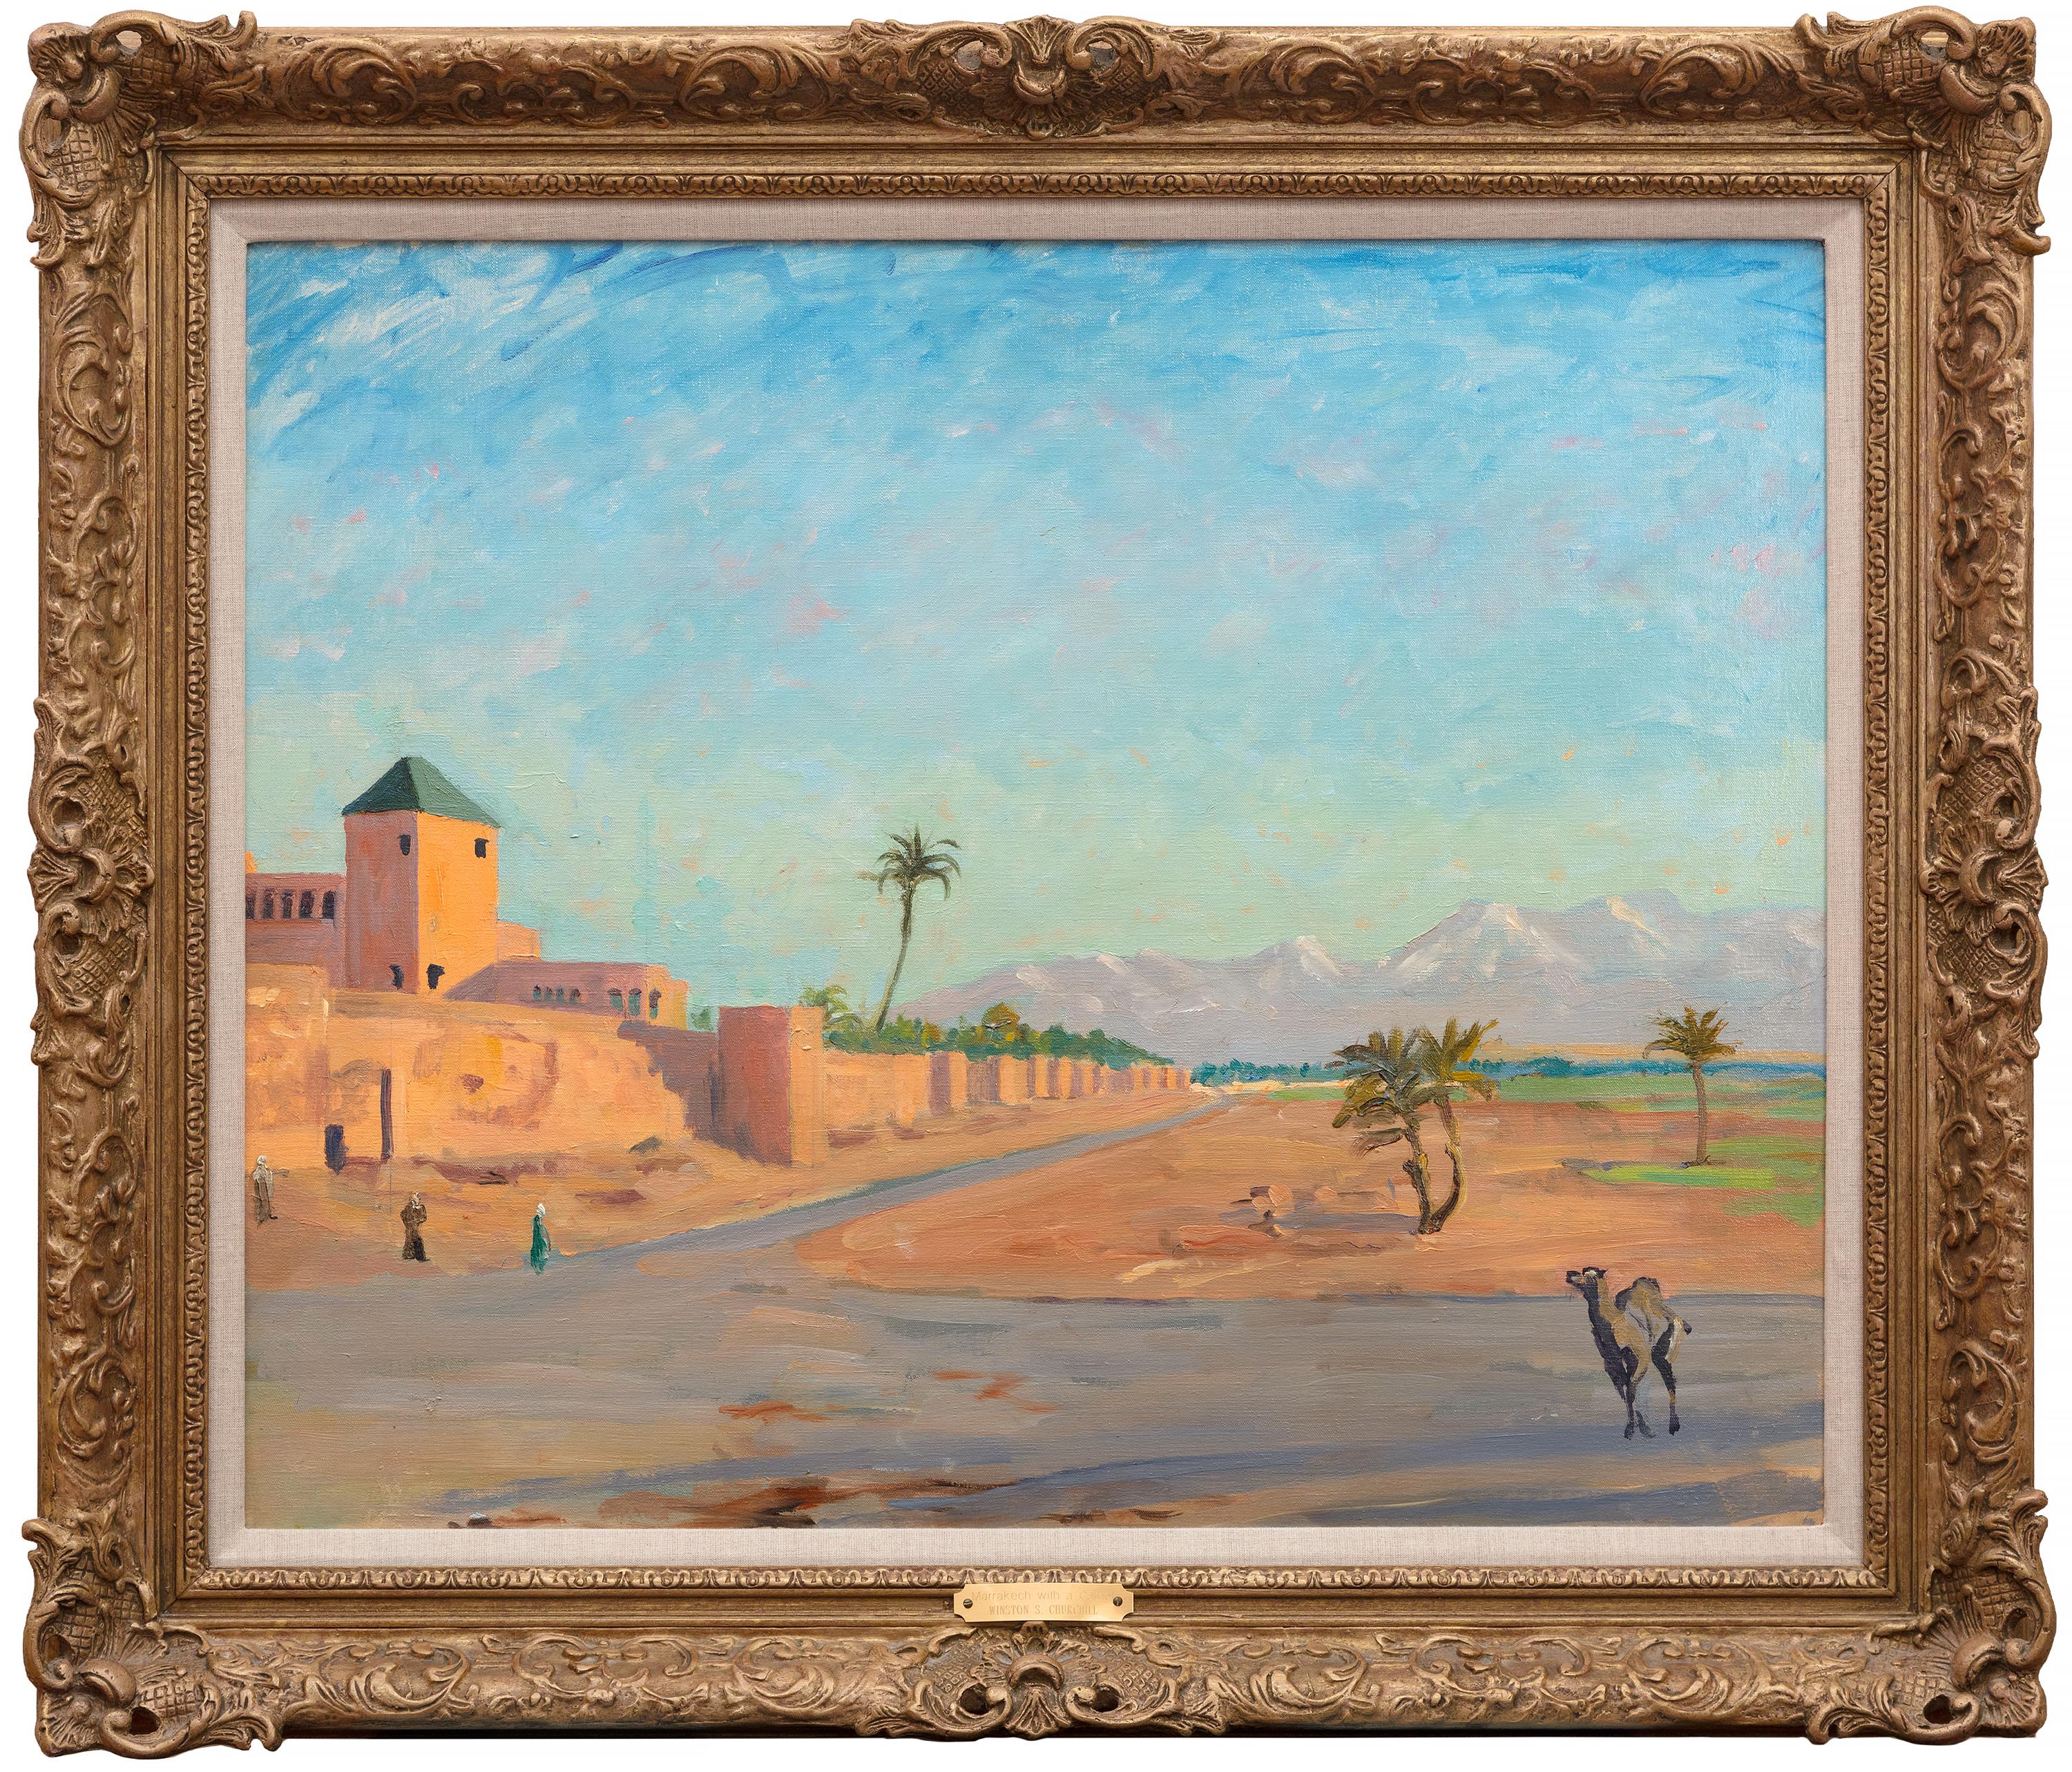 Marrakech with a Camel - Painting by Winston Churchill